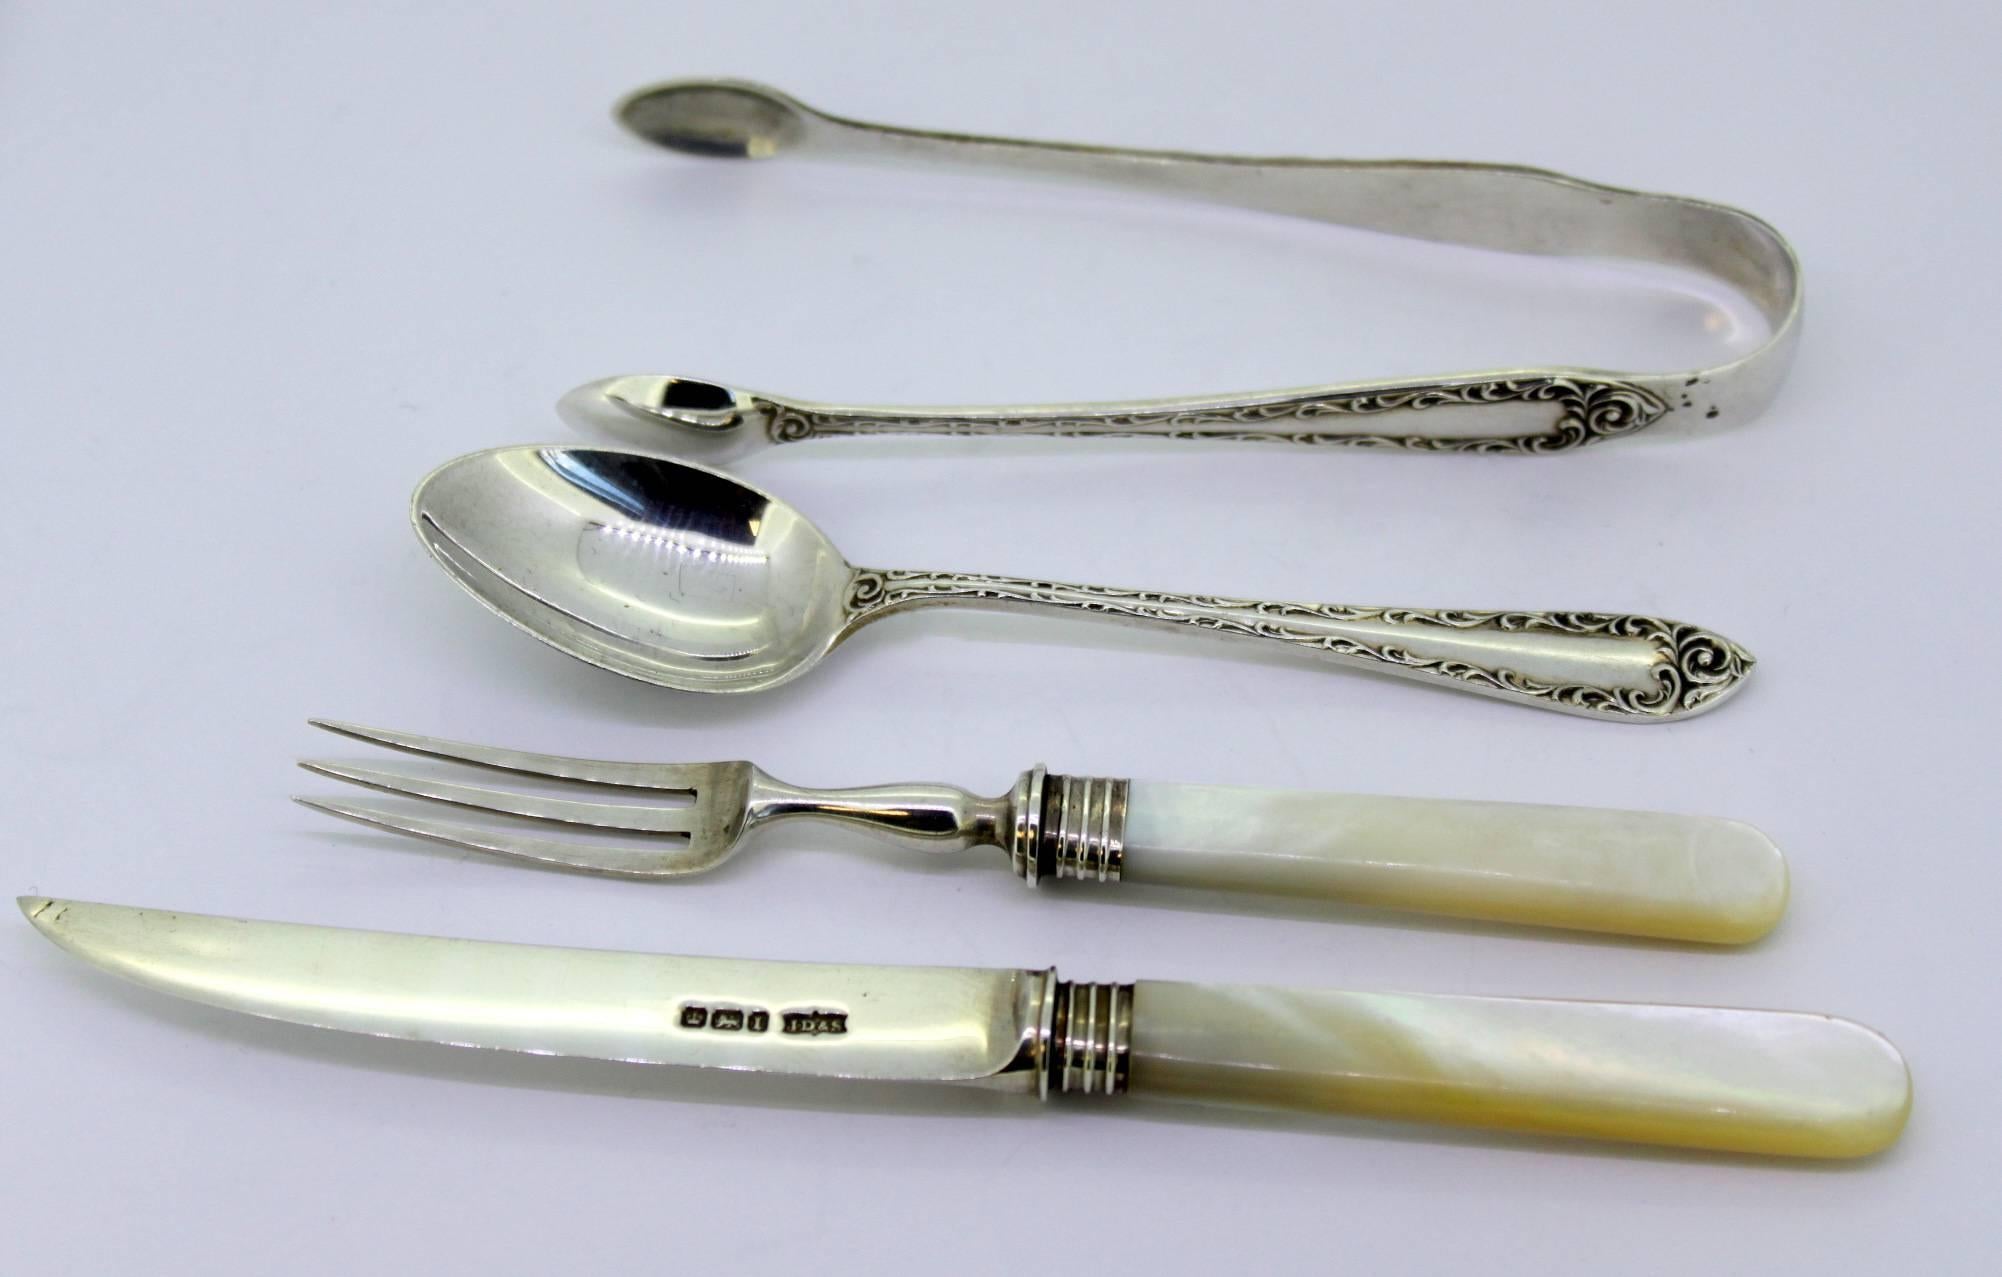 Antique silver and mother-of-pearl tableware set (Six knives, six forks, six spoons and one sugar tong)
Made in Sheffield 1903
Maker: James Dixon & Sons Ltd
Fully hallmarked.

Dimensions: 
Knife size: 15.5 x 1.3 x 0.6 cm
Weight: 24